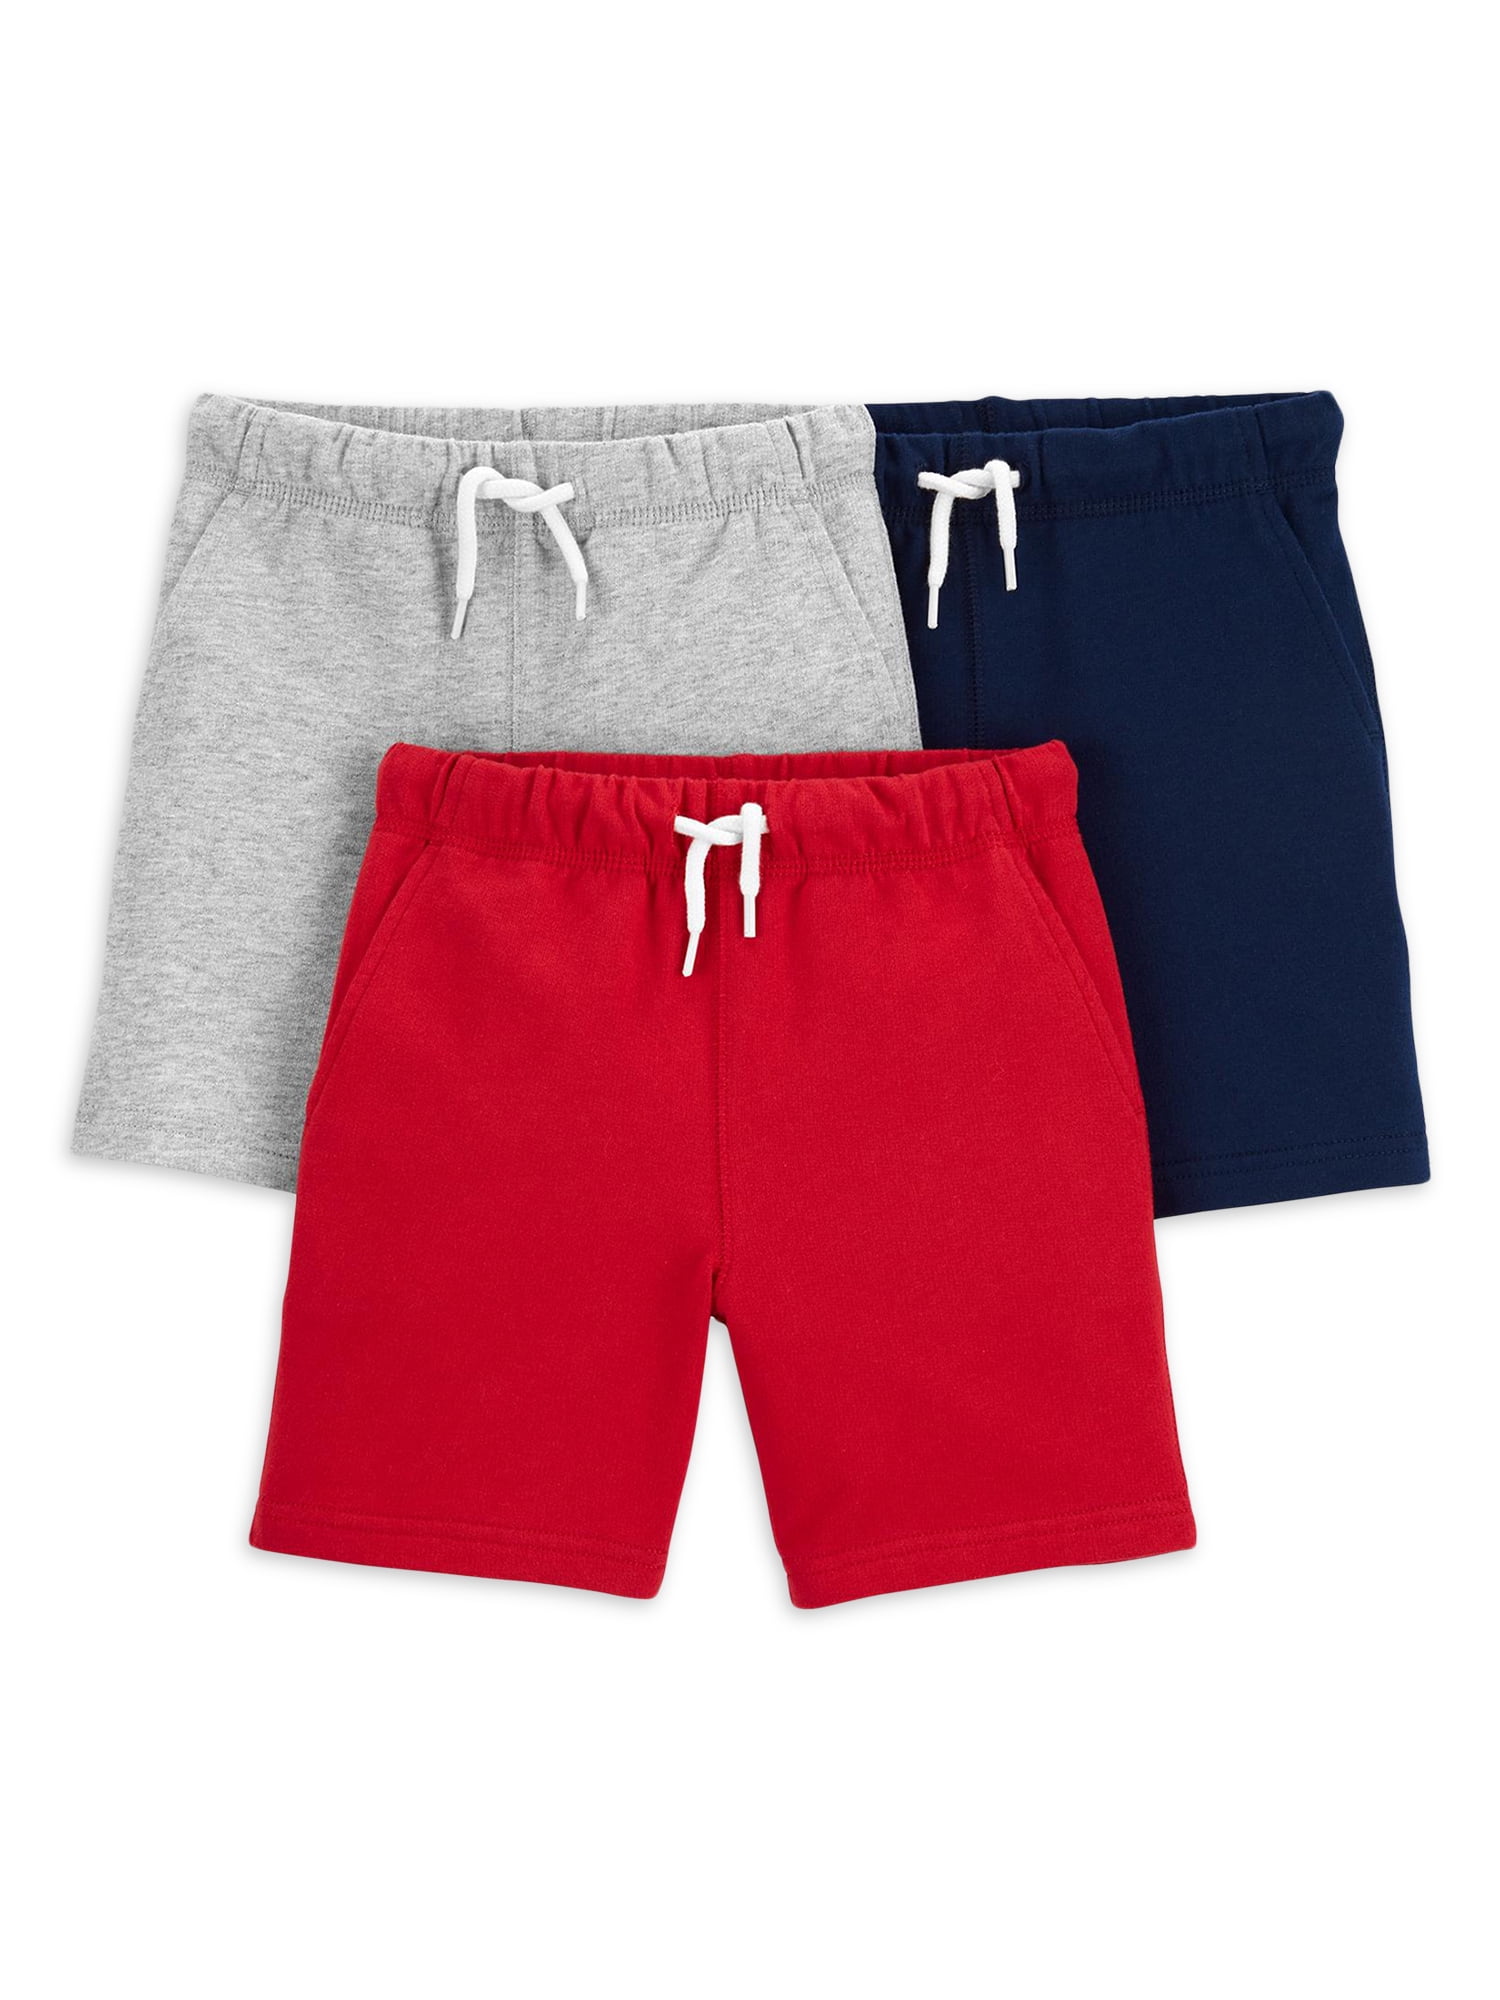 II. Why choose baby shorts for your little one?